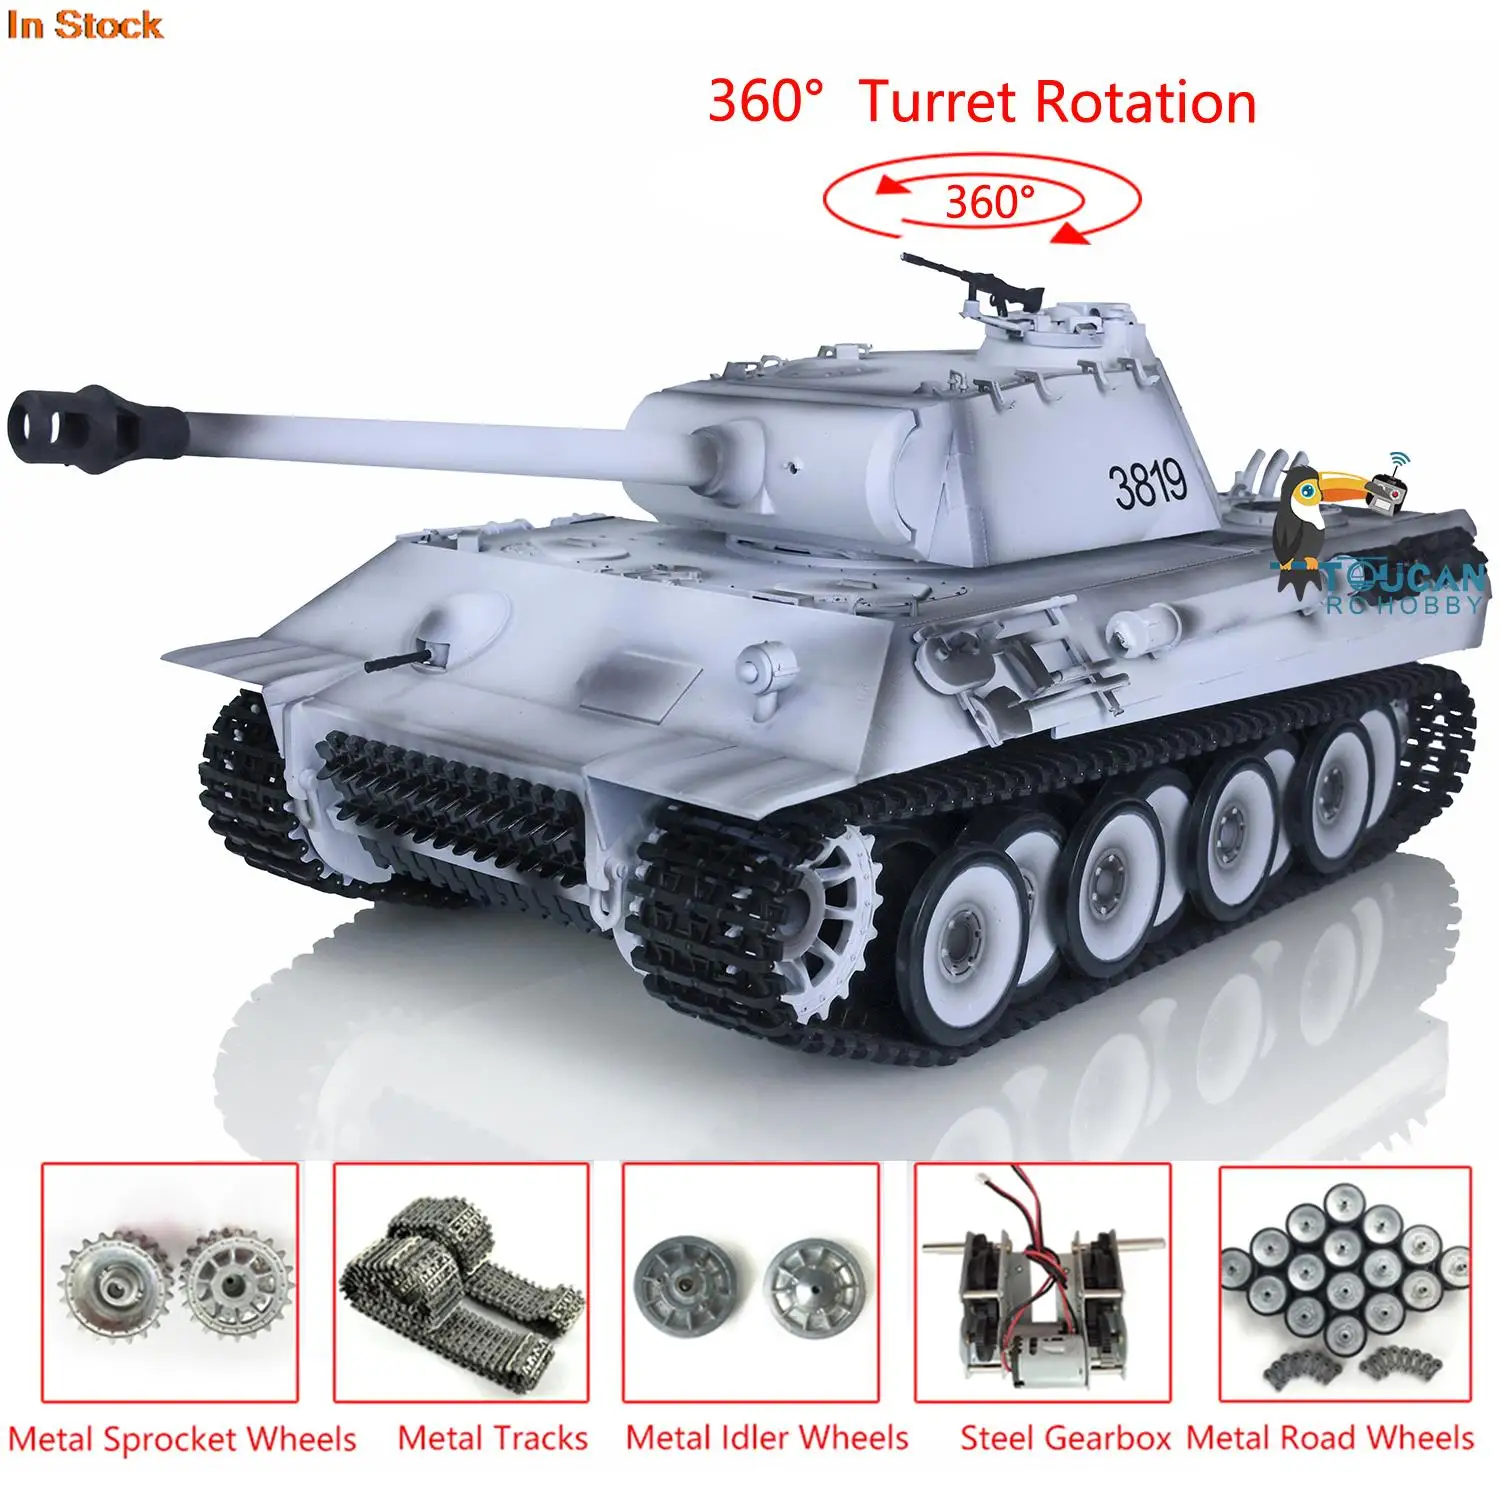 

1/16 Heng Long Snow 7.0 Customized Panther RTR RC Tank 3819 Metal Tracks Smoke Engine Infrared Toucan Controlled Toys TH17299